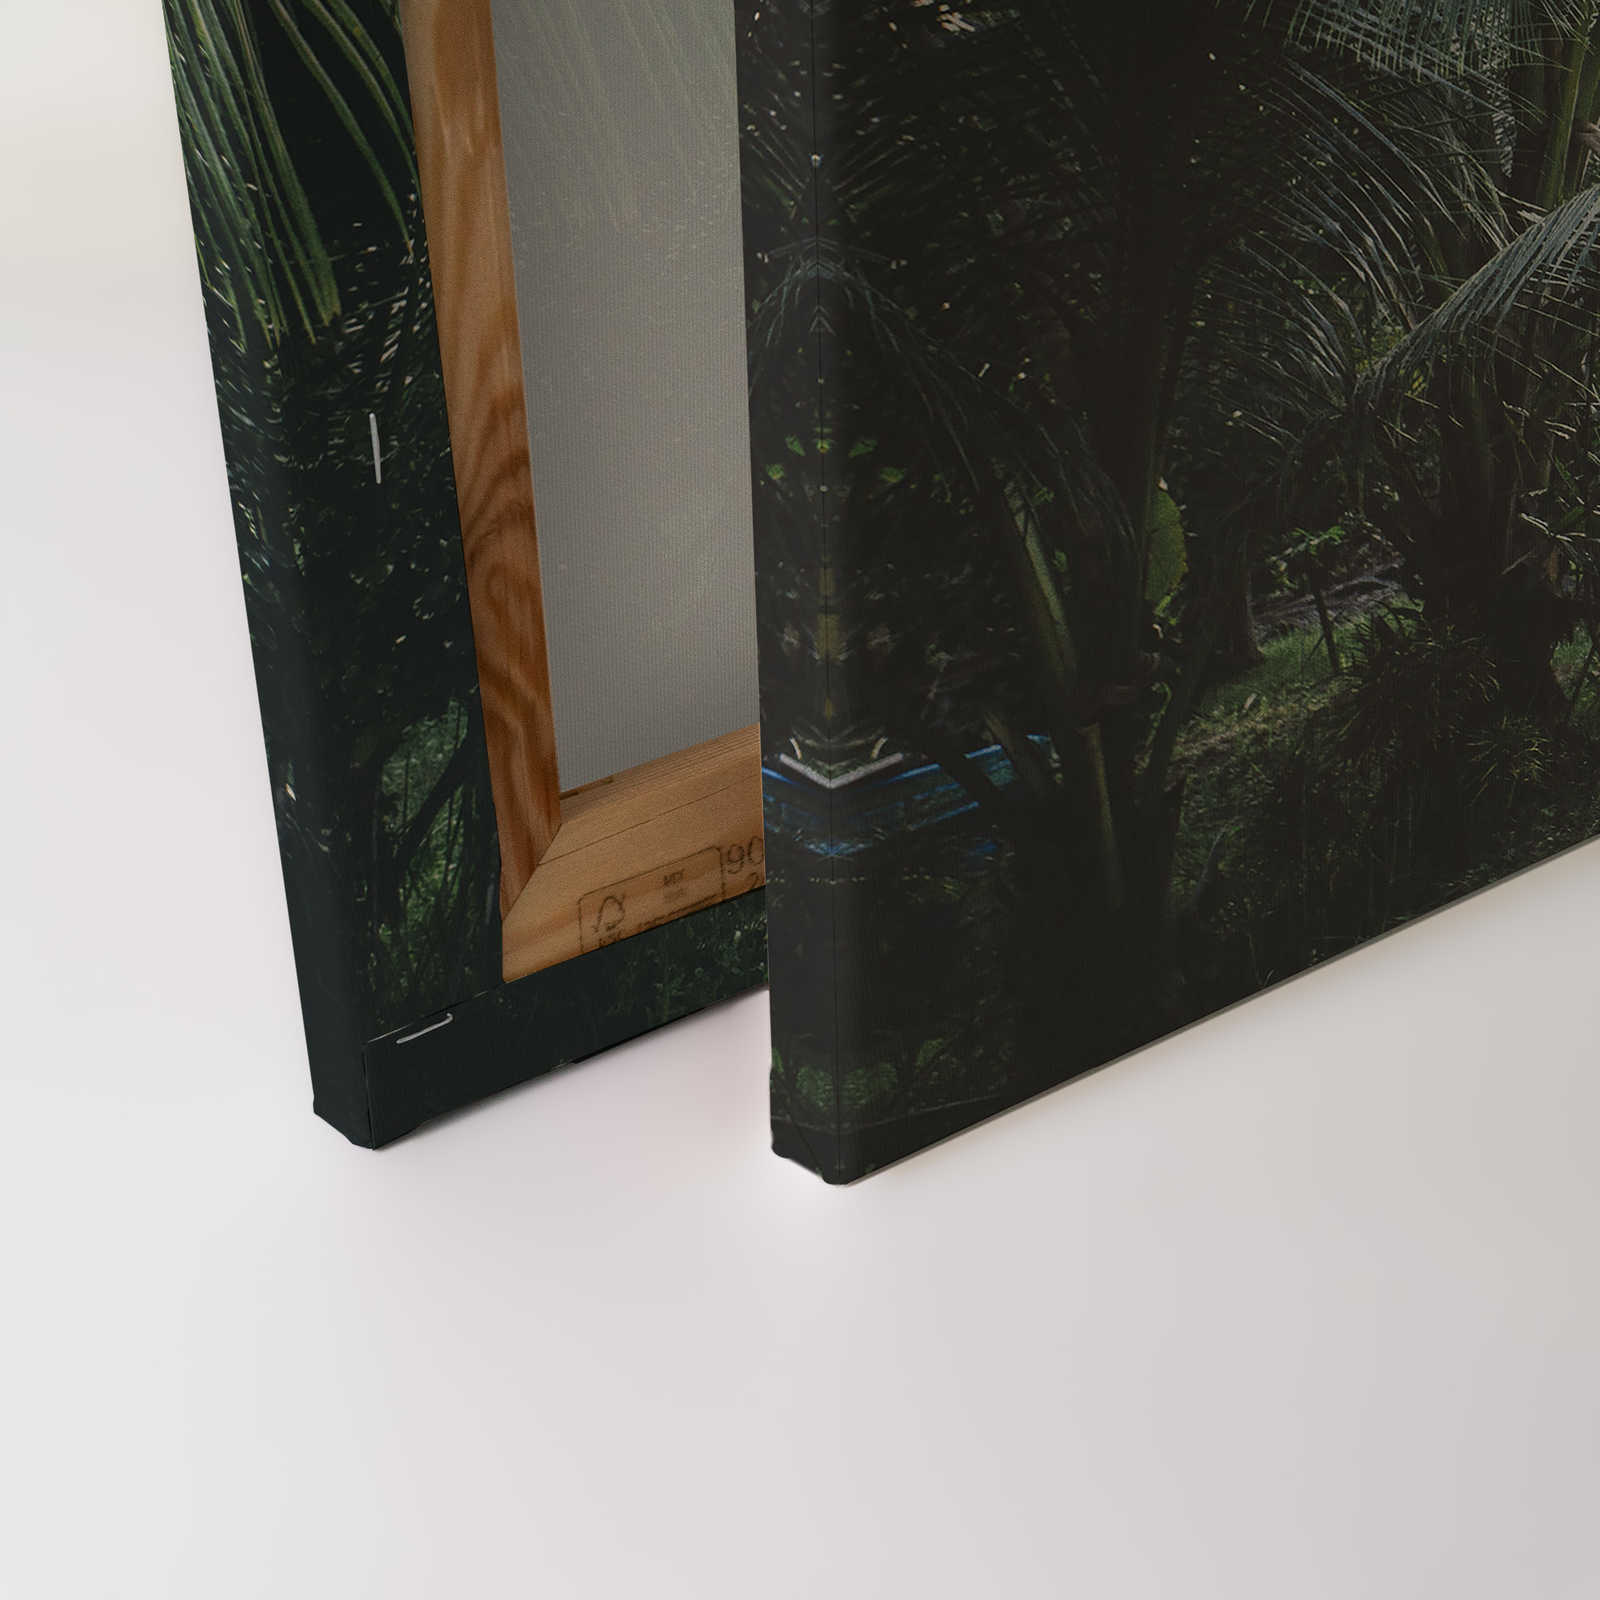             Canvas painting with path through a tropical jungle - 0.90 m x 0.60 m
        